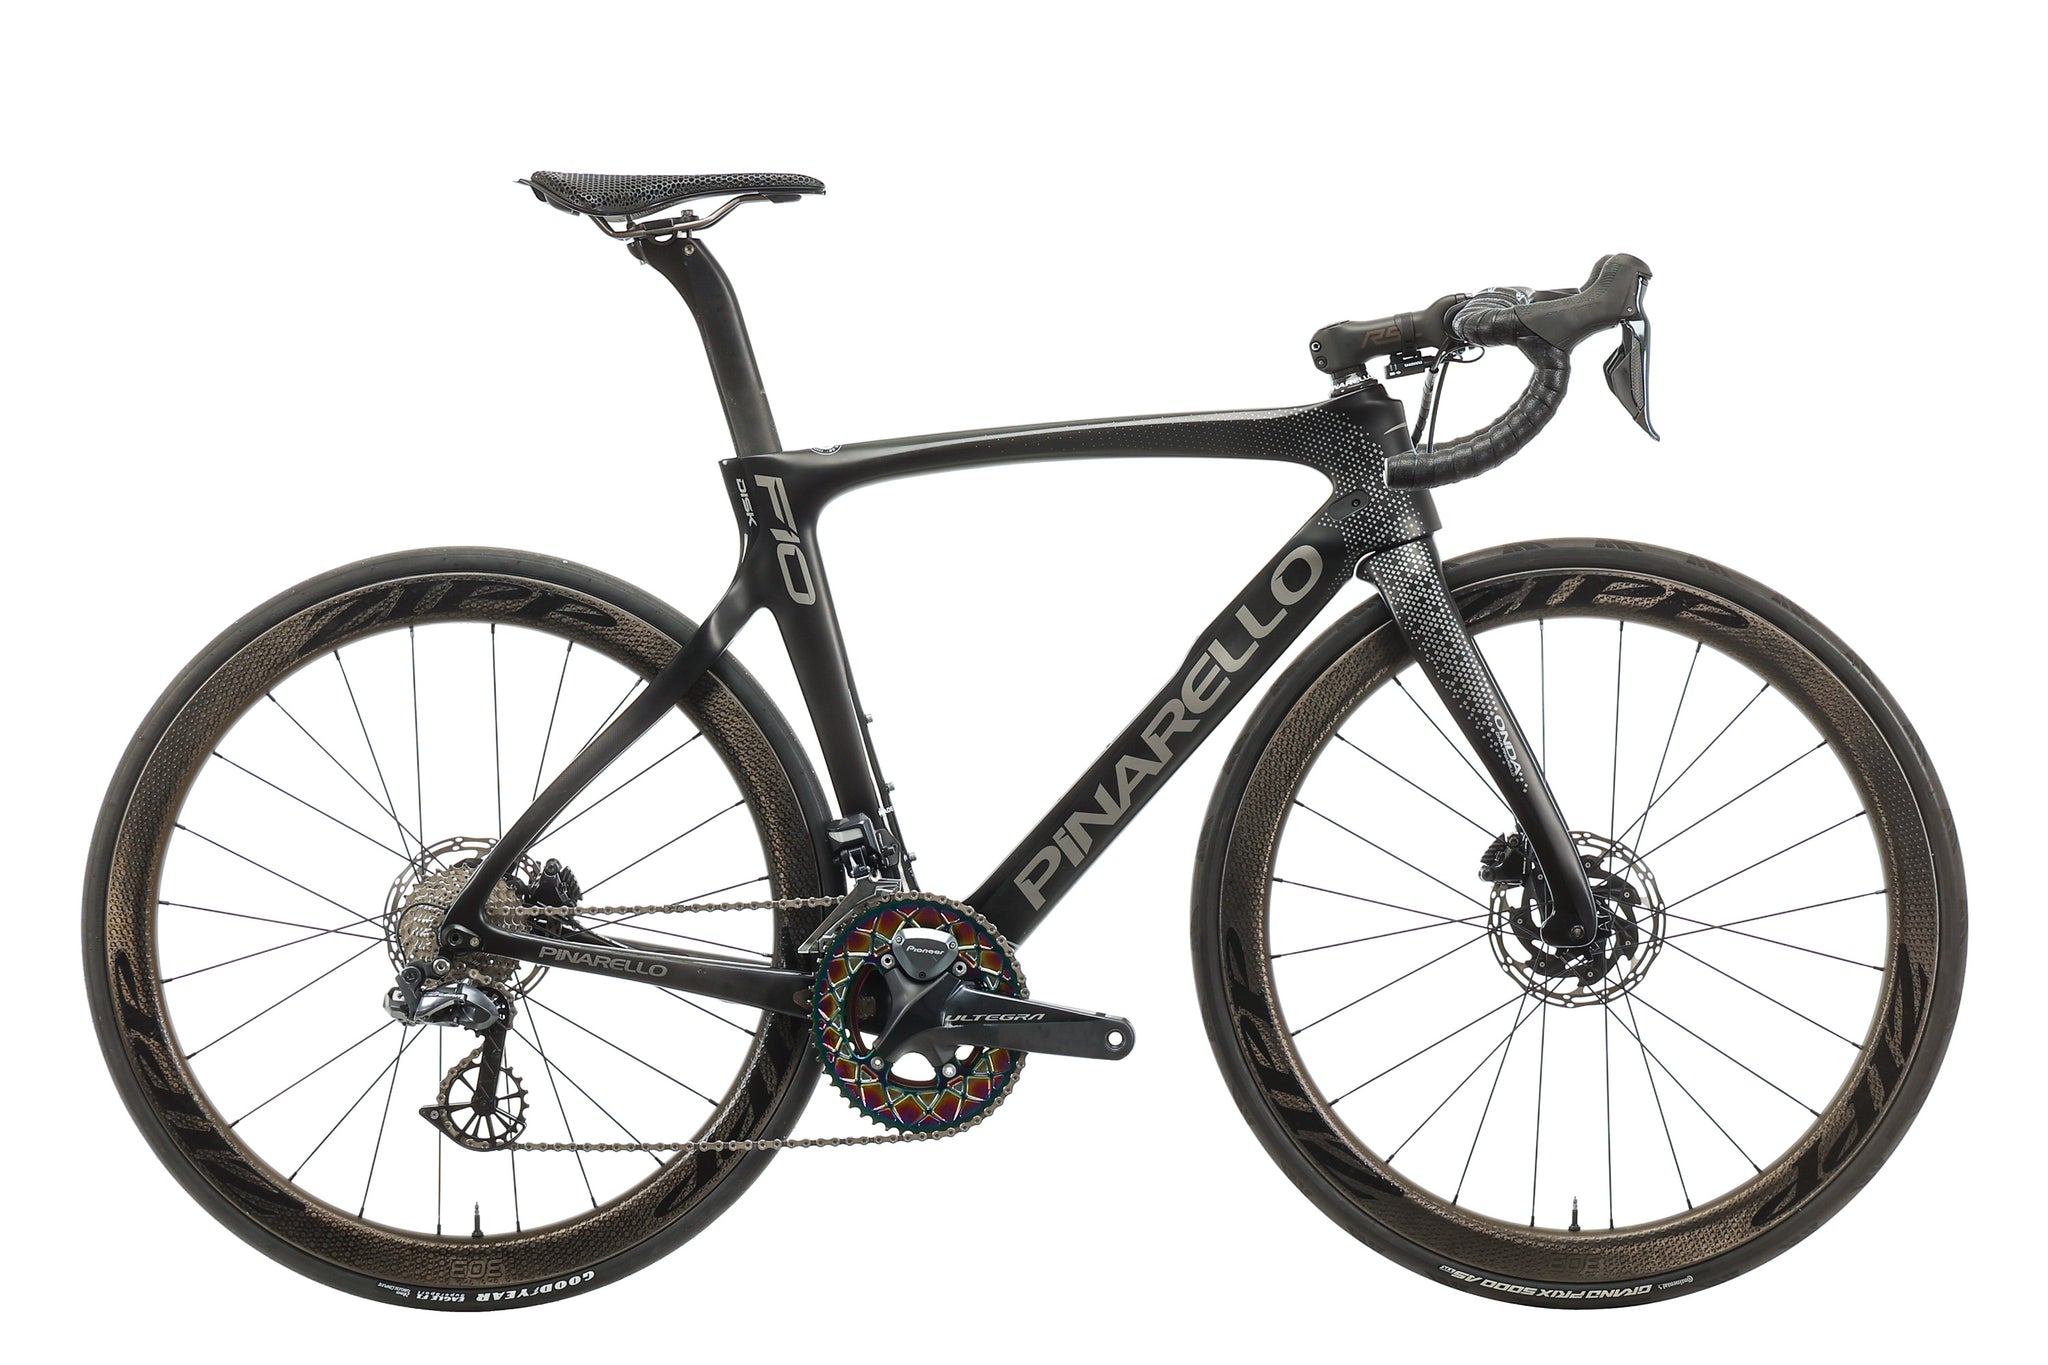 This ENVE MOG x Classified Bike Might Represent the Future of 1x